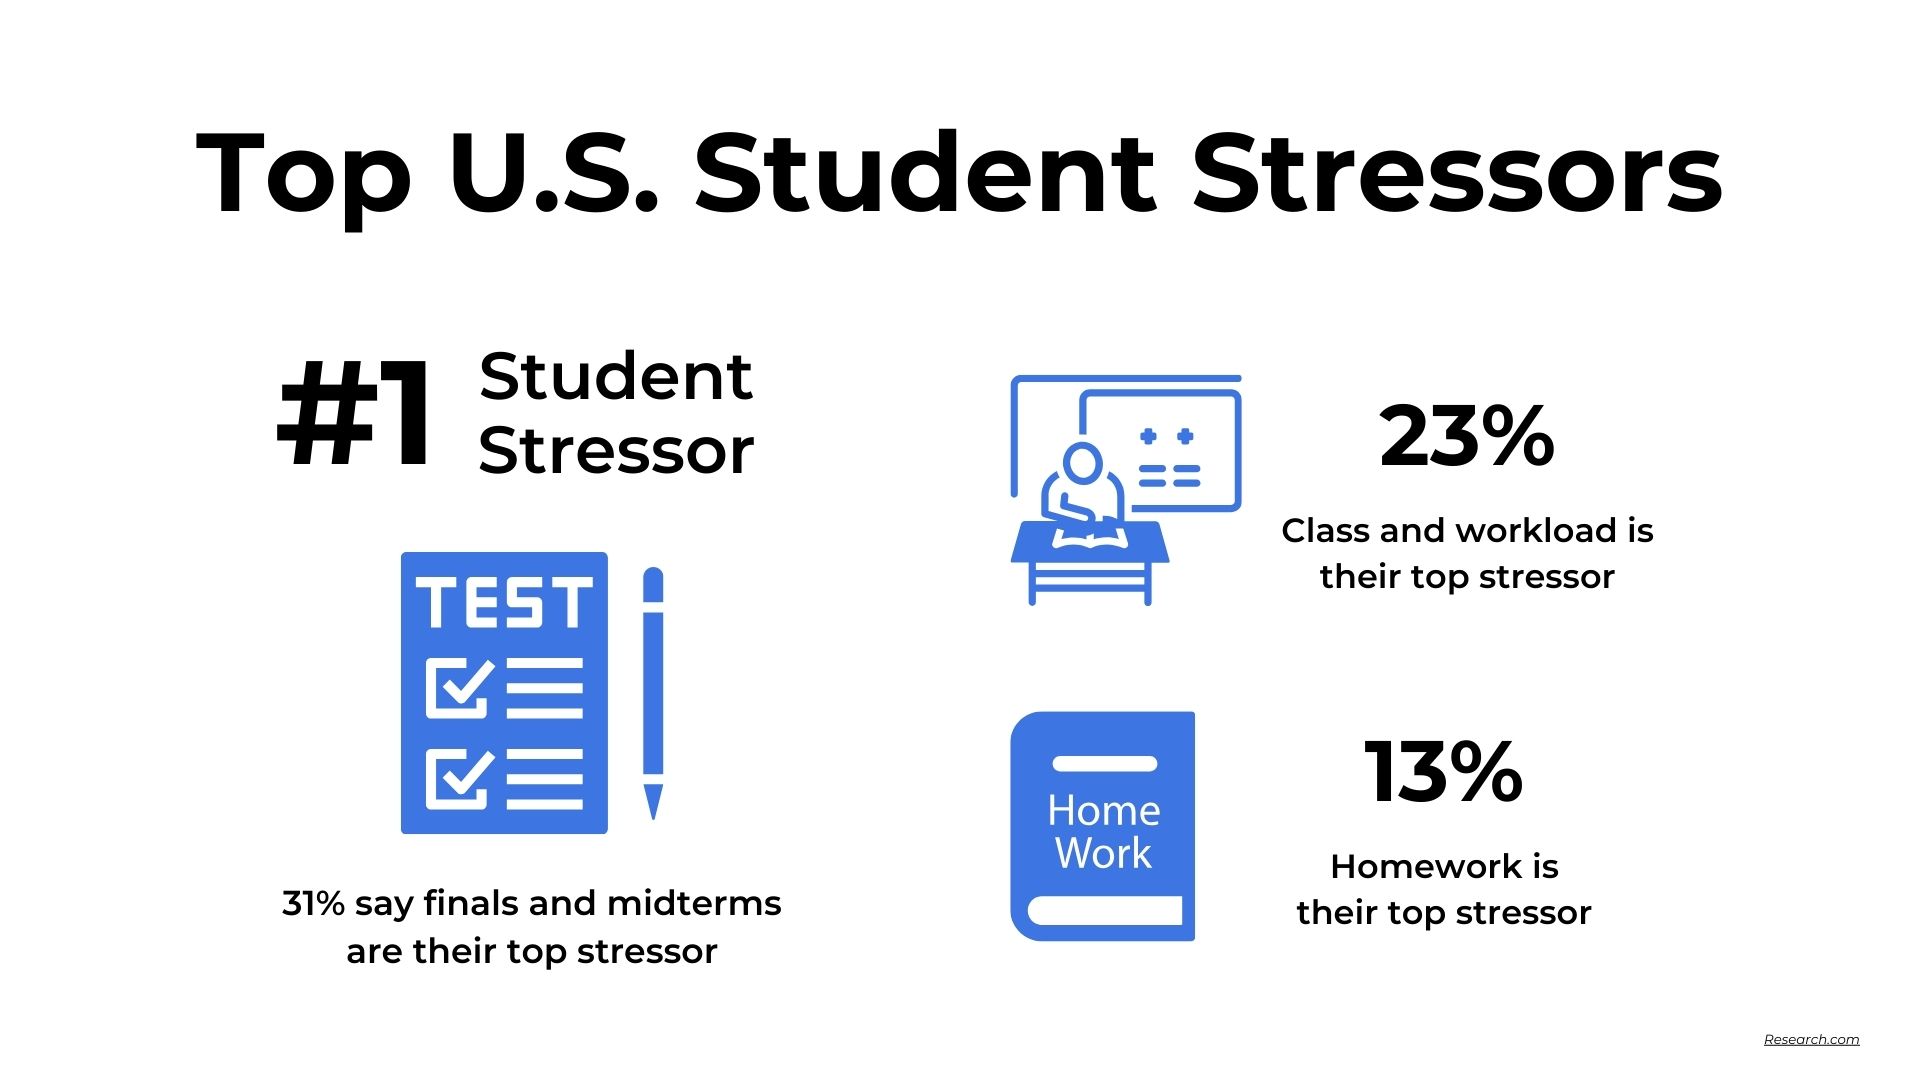 Top U.S. Student Stressors: #1 Student Stressor - 31% say finals an midterms are their top stressor; 23% class and workload is their top stressor; 13% homework is their top stressor.